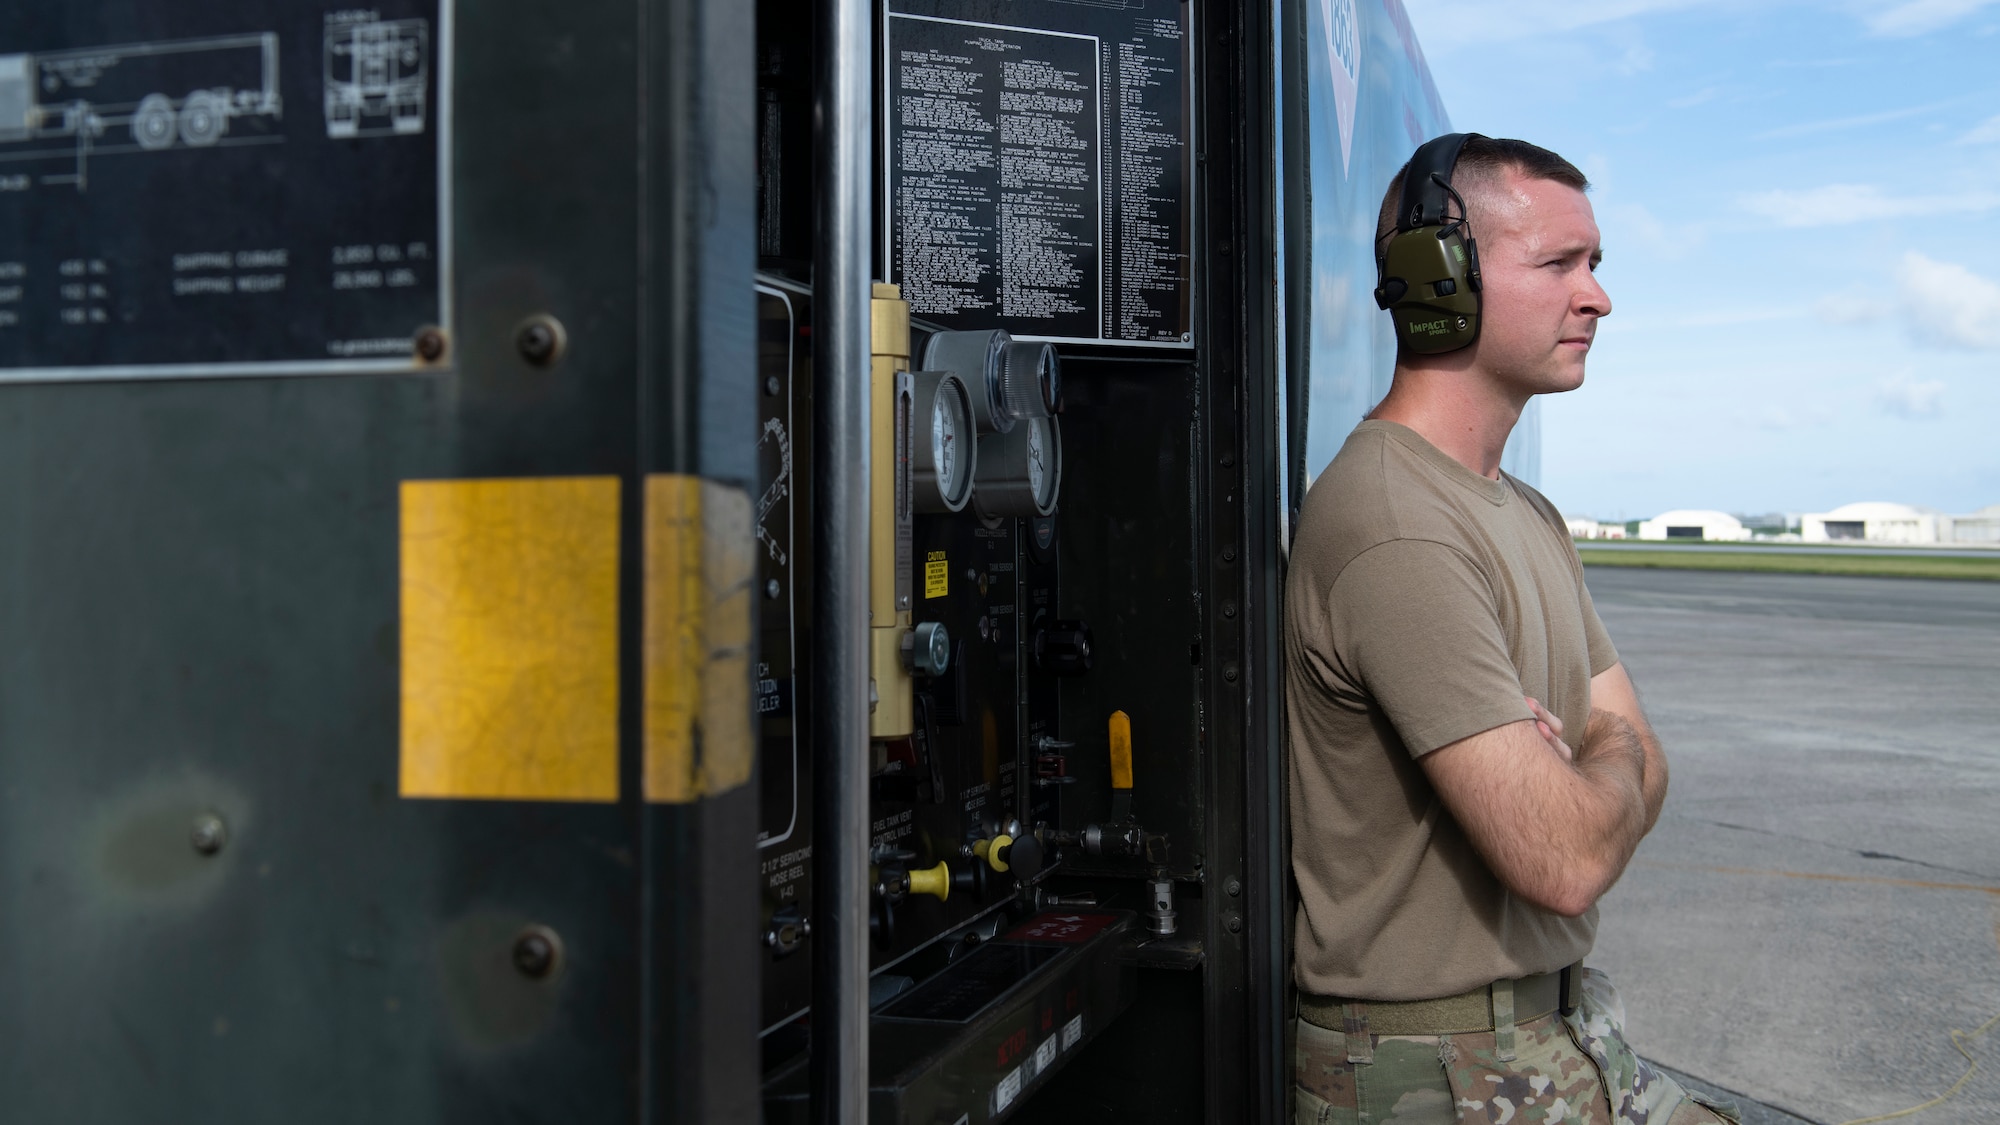 An Airman assigned to the 18th Logistics Readiness Squadron petroleum, oils and lubricants flight monitors hot-pit refueling during surge operations at Kadena Air Base, Japan, Aug. 24, 2022. During a hot-pit refuel, the pilot remains in the cockpit with engines running while maintenance crews perform safety checks and refuel the aircraft, cutting the time between sorties to less than 30 minutes. (U.S. Air Force photo by Senior Airman Jessi Roth)